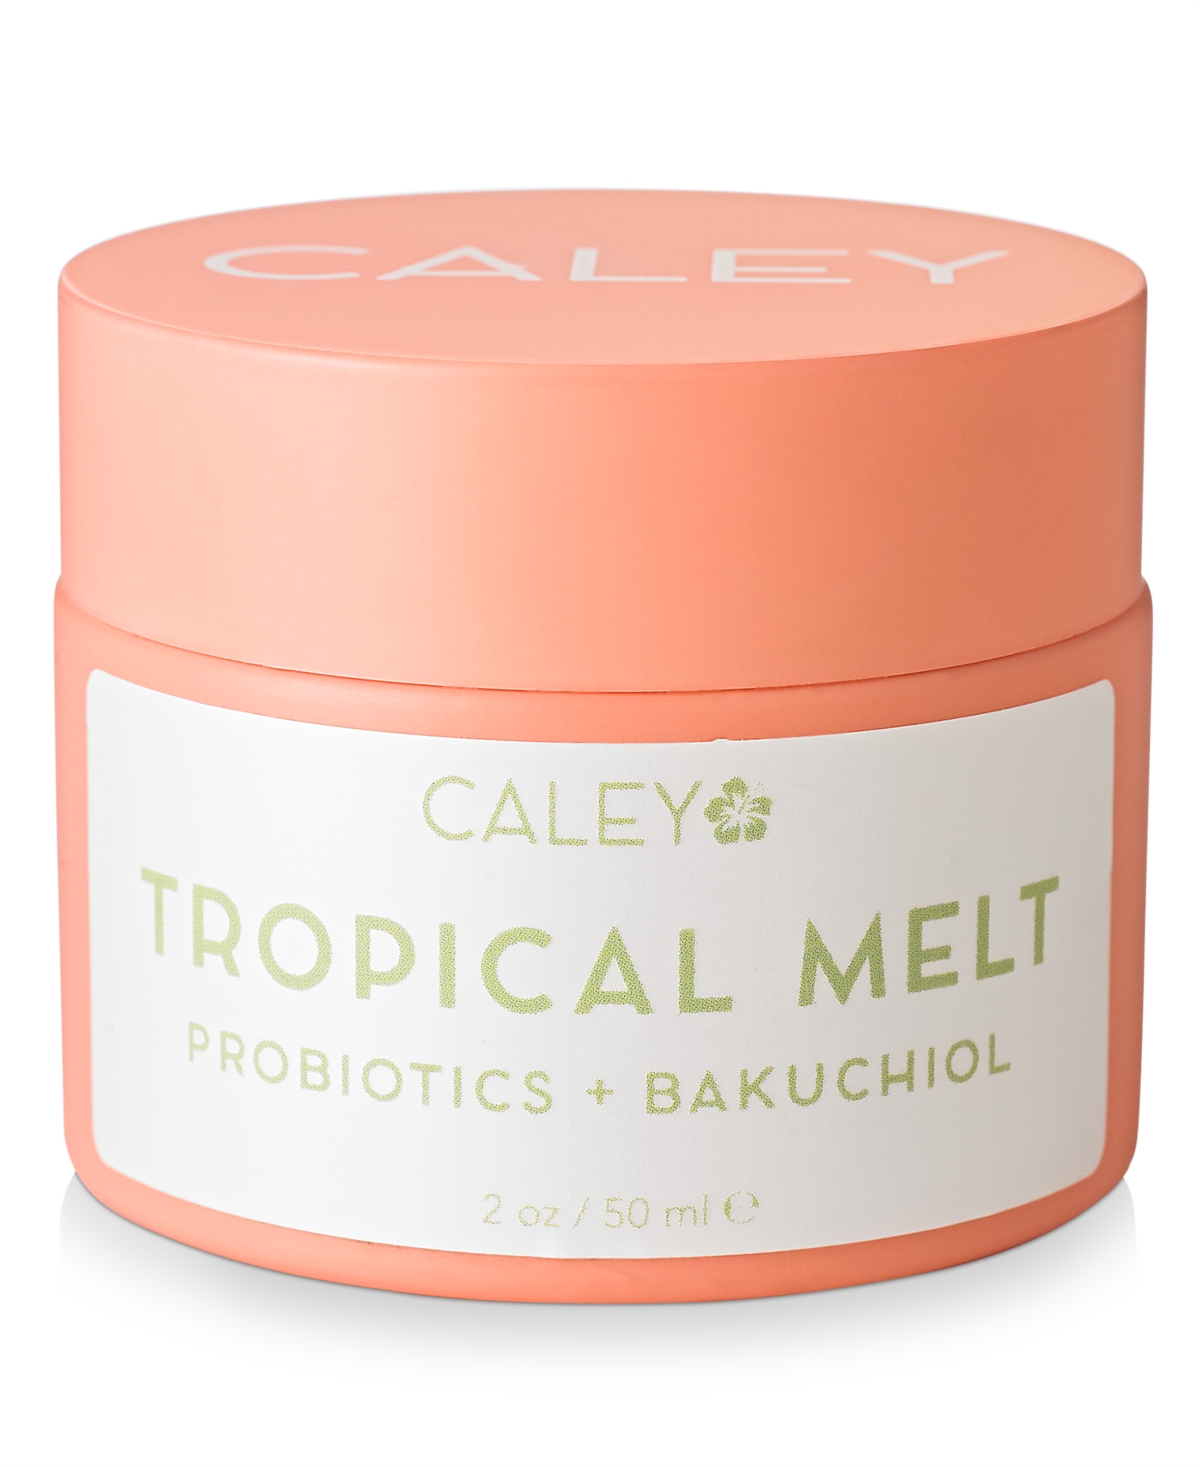 Tropical Melt Cleansing Balm - Apricot